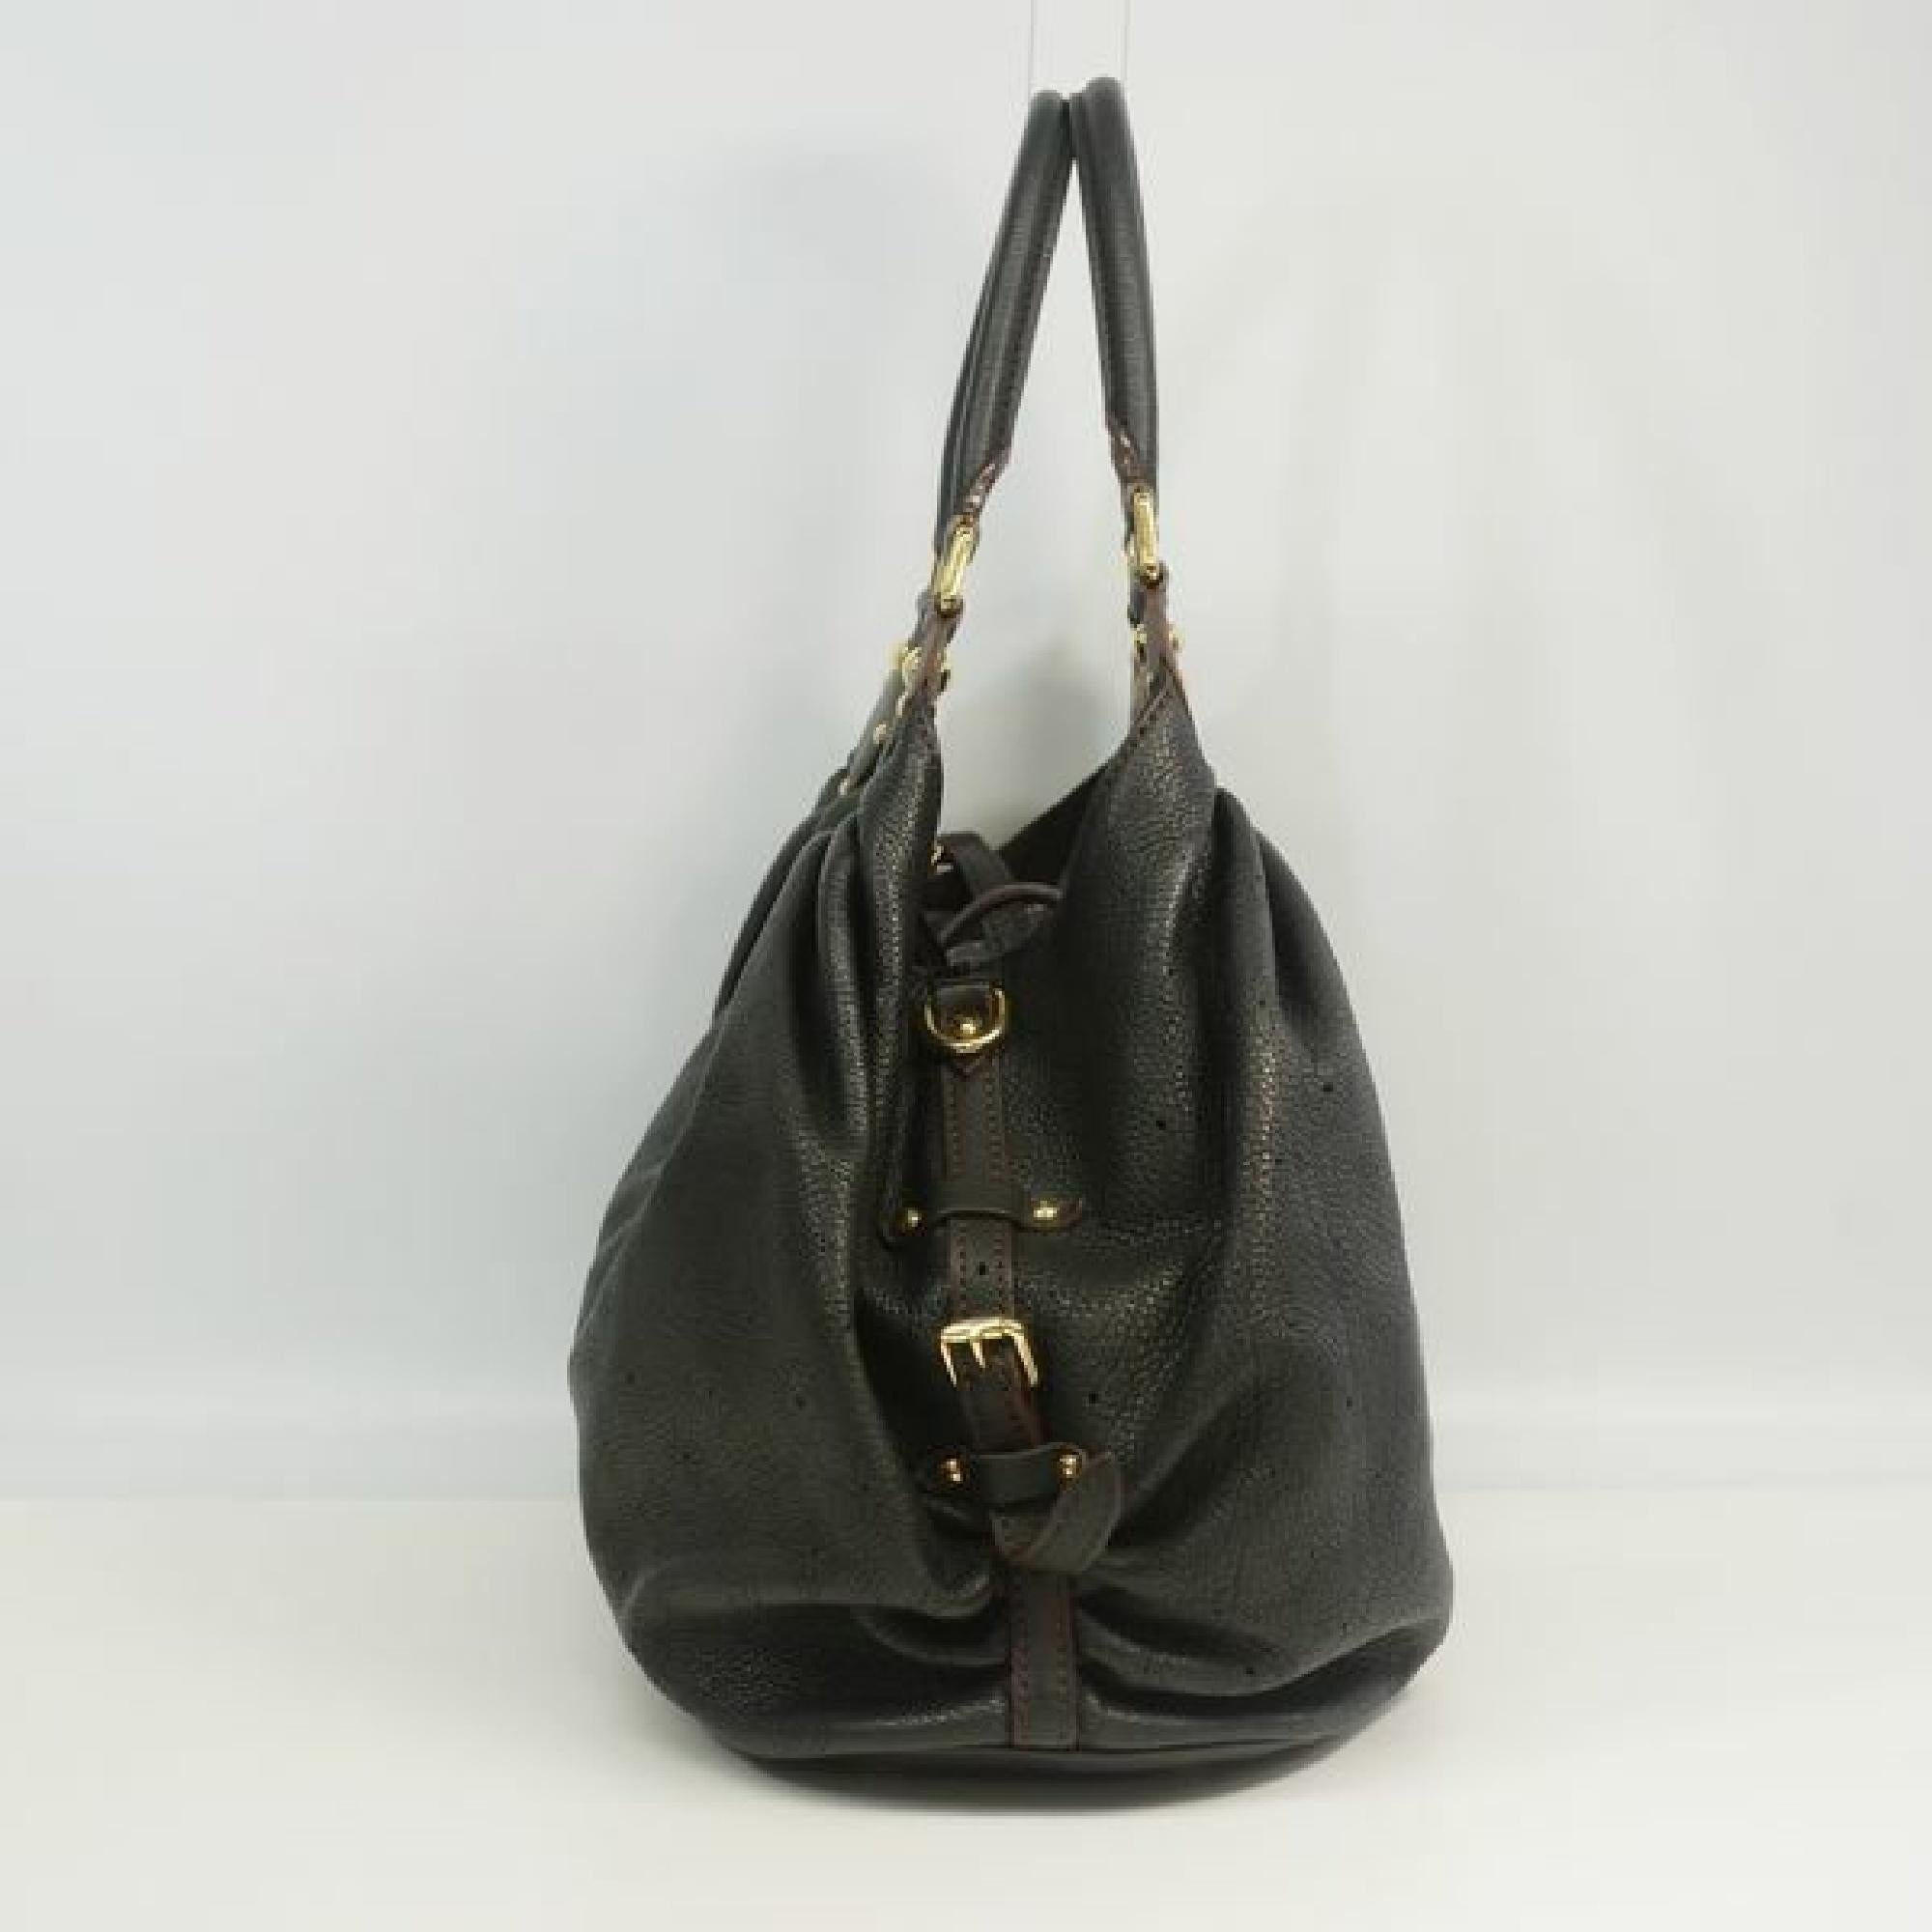 An authentic XL  Womens  handbag M95547  noir( black). The color is noir( black). The outside material is Monogram Mahina. The pattern is XL. This item is Contemporary. The year of manufacture would be 2008.
Rank
AB signs of wear (Small)
Used goods